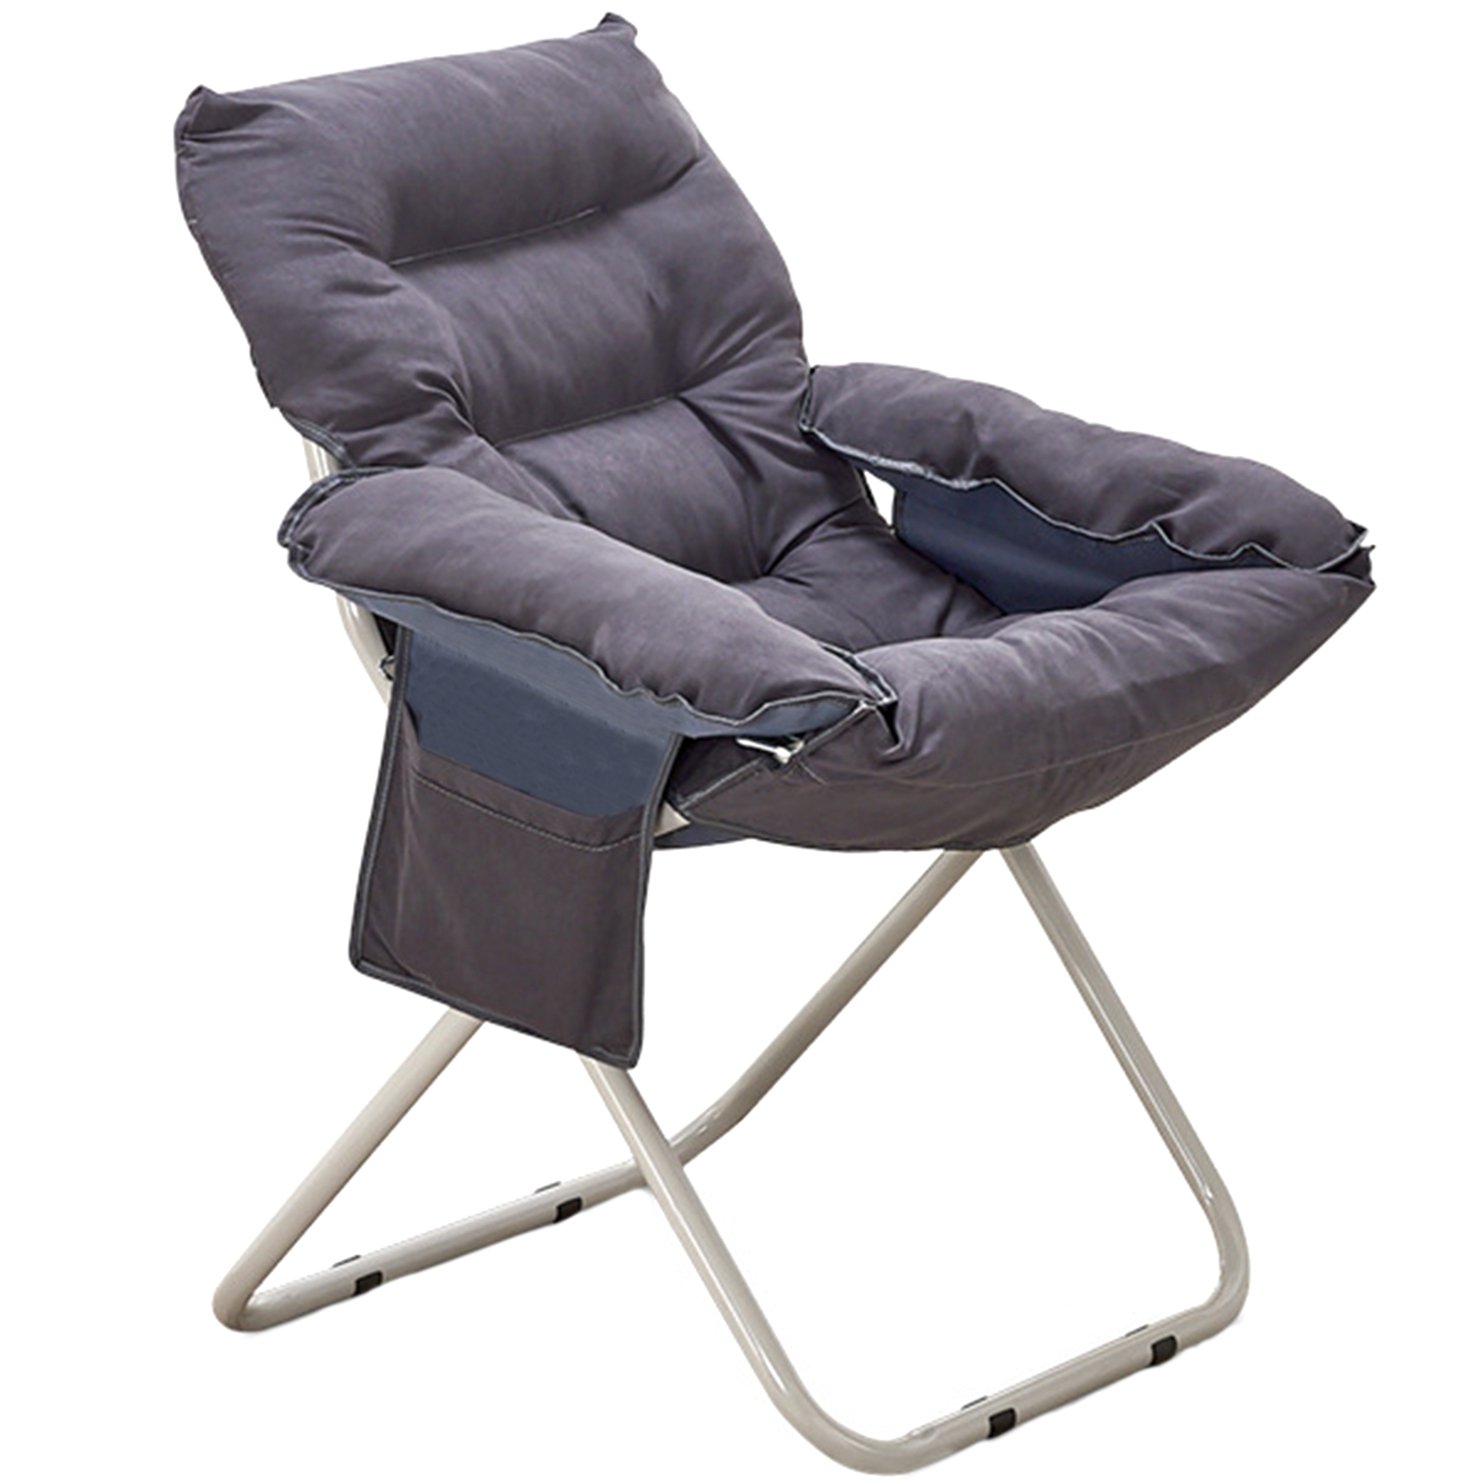 Folding Lounger Lazy Chair